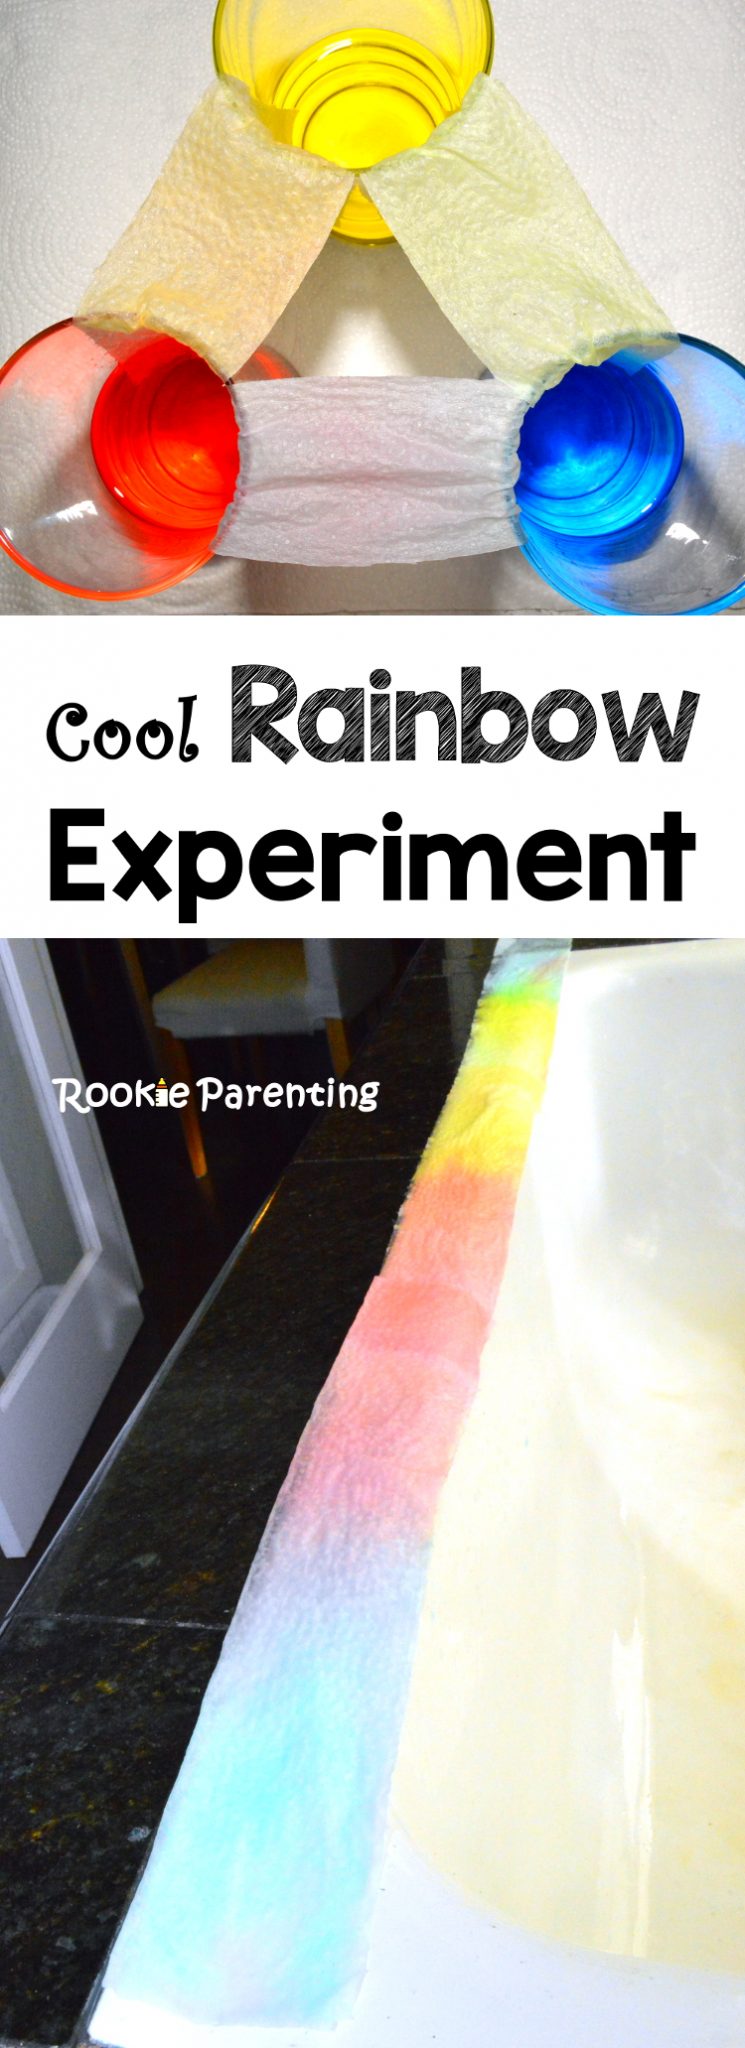 Walking water illustration. glasses with blue, red and yellow water are connected using wet paper towels. color walks from one glass to the next, creating rainbow color science experiment.